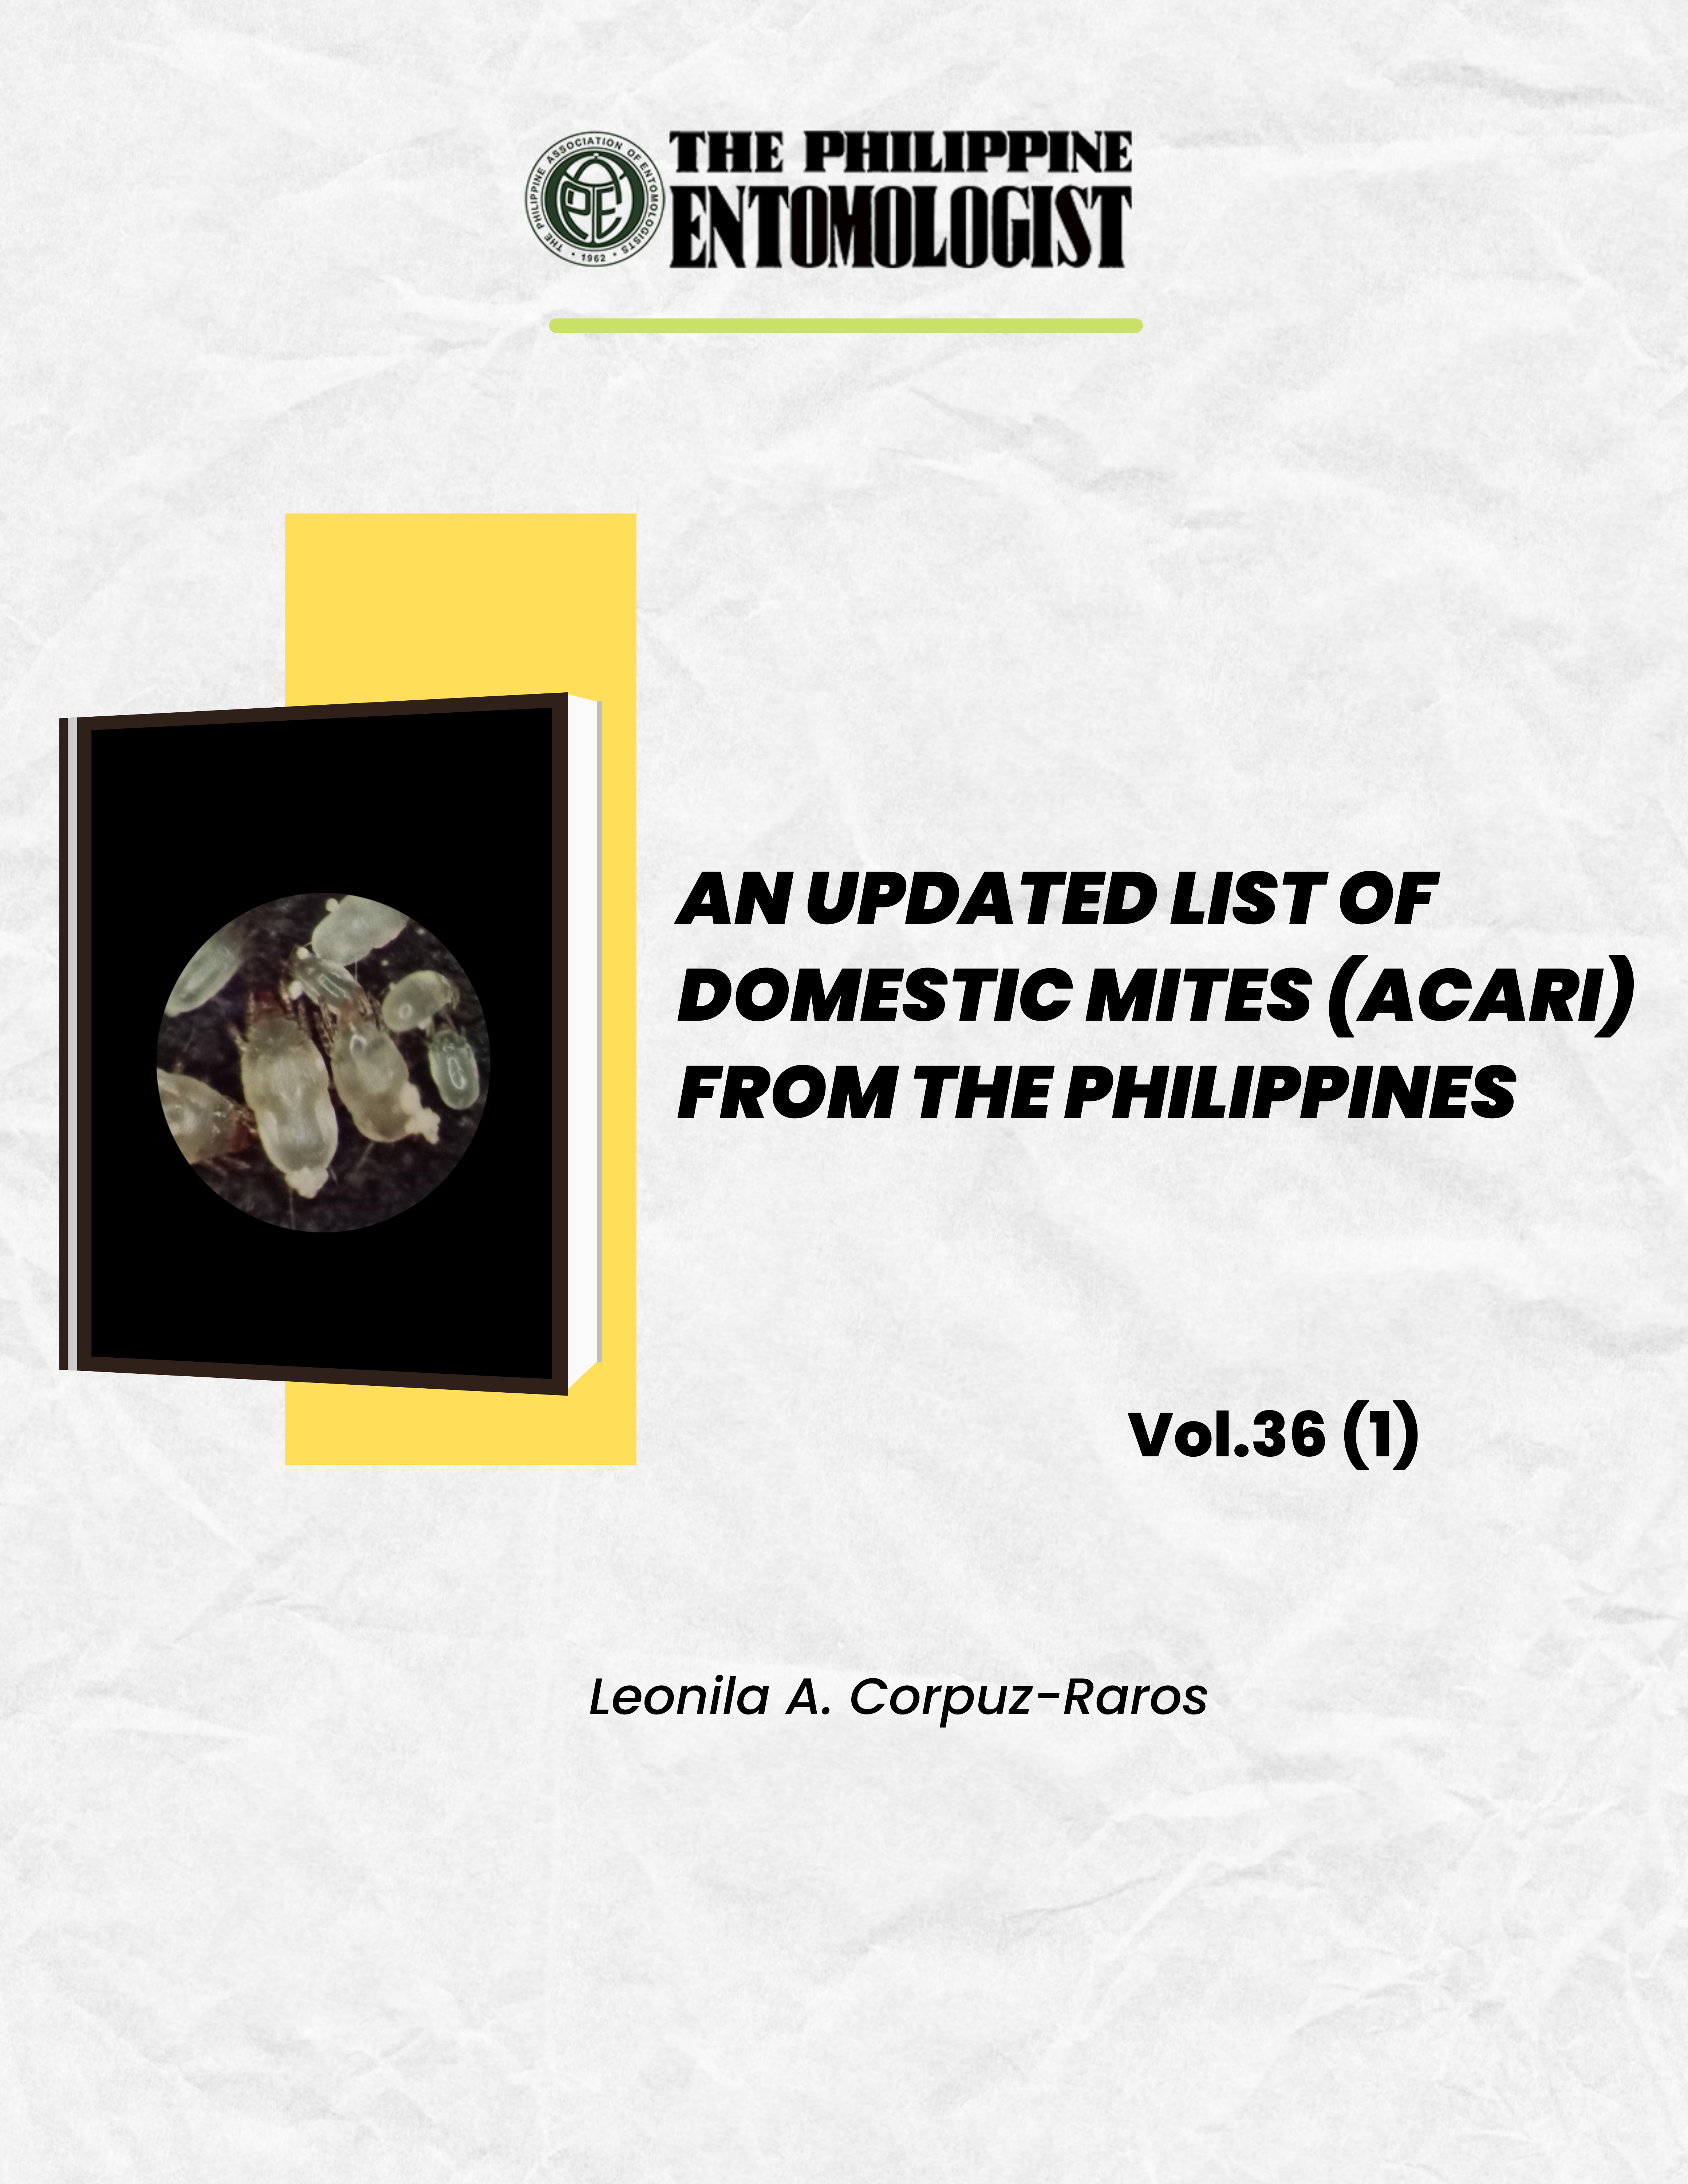 AN UPDATED LIST OF DOMESTIC MITES (ACARI) FROM THE PHILIPPINES